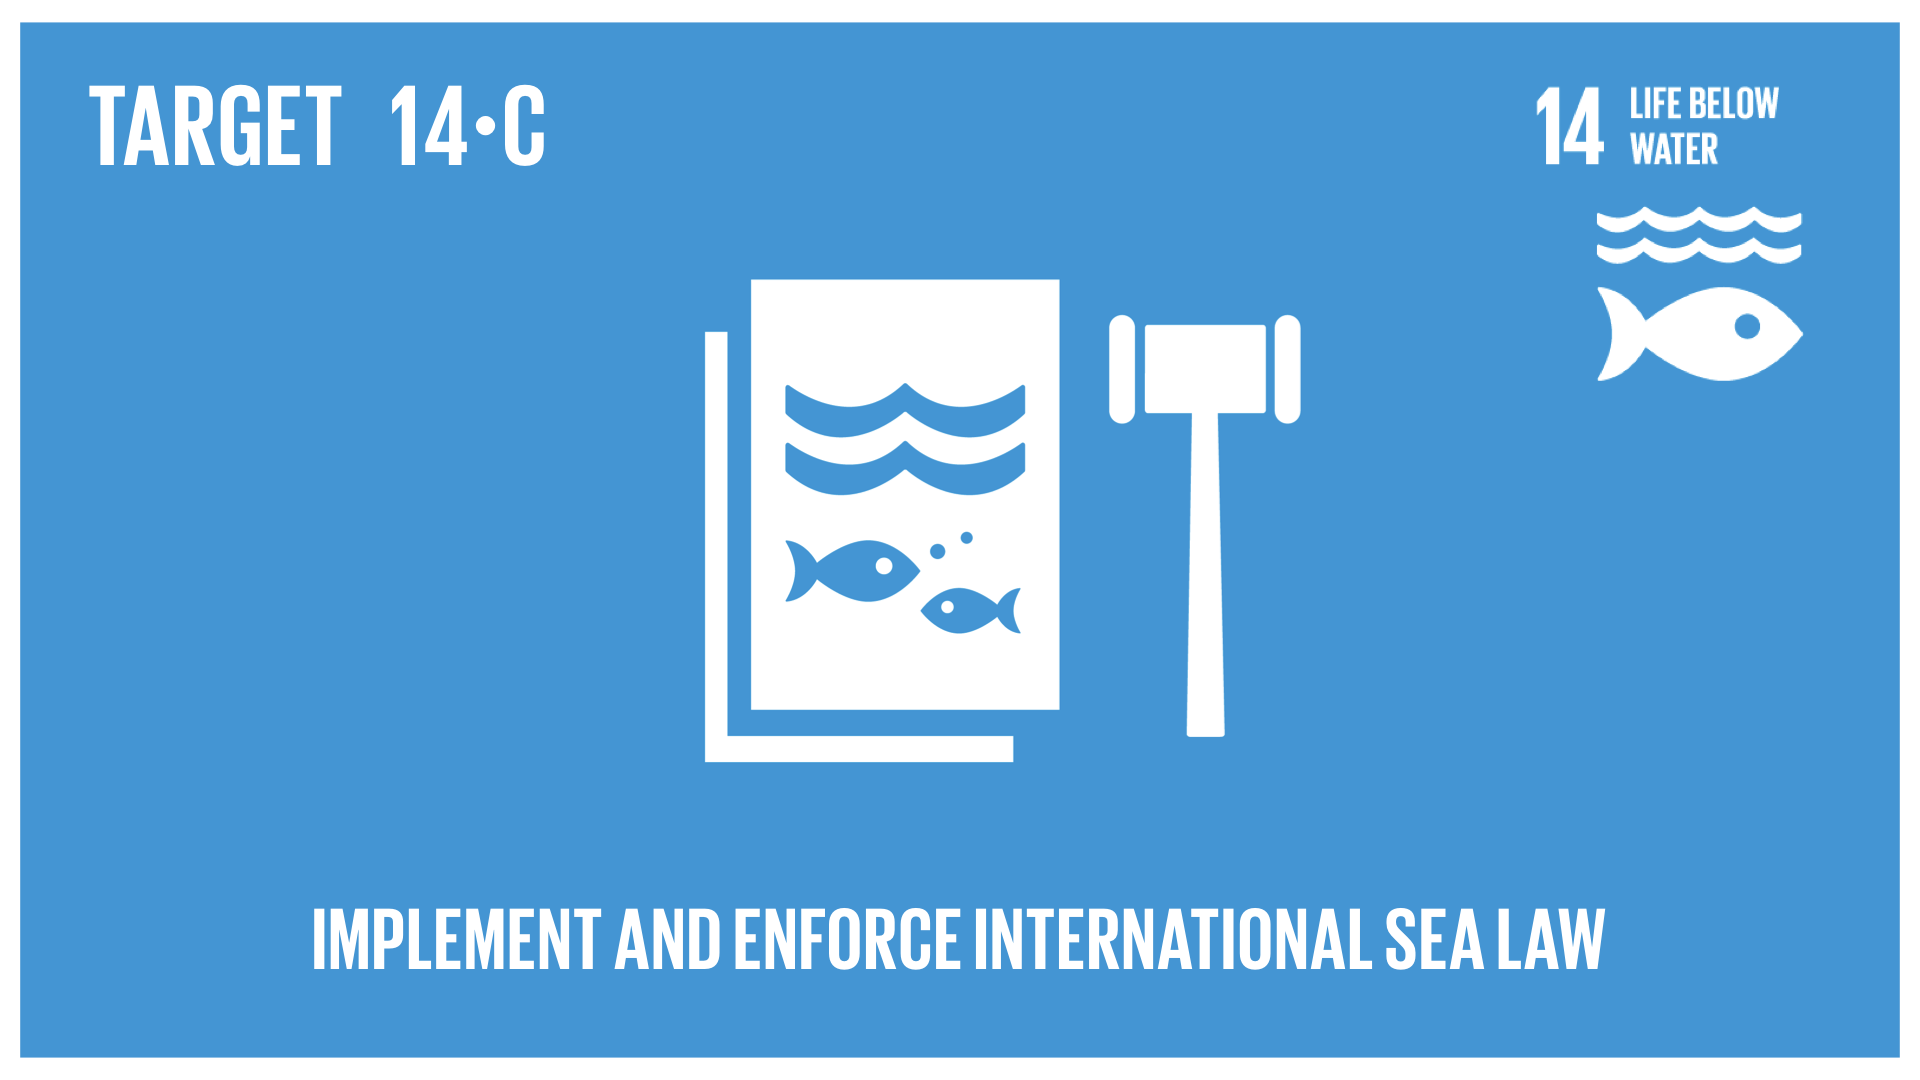 Graphic displaying the implementation and enforcement of international sea law 